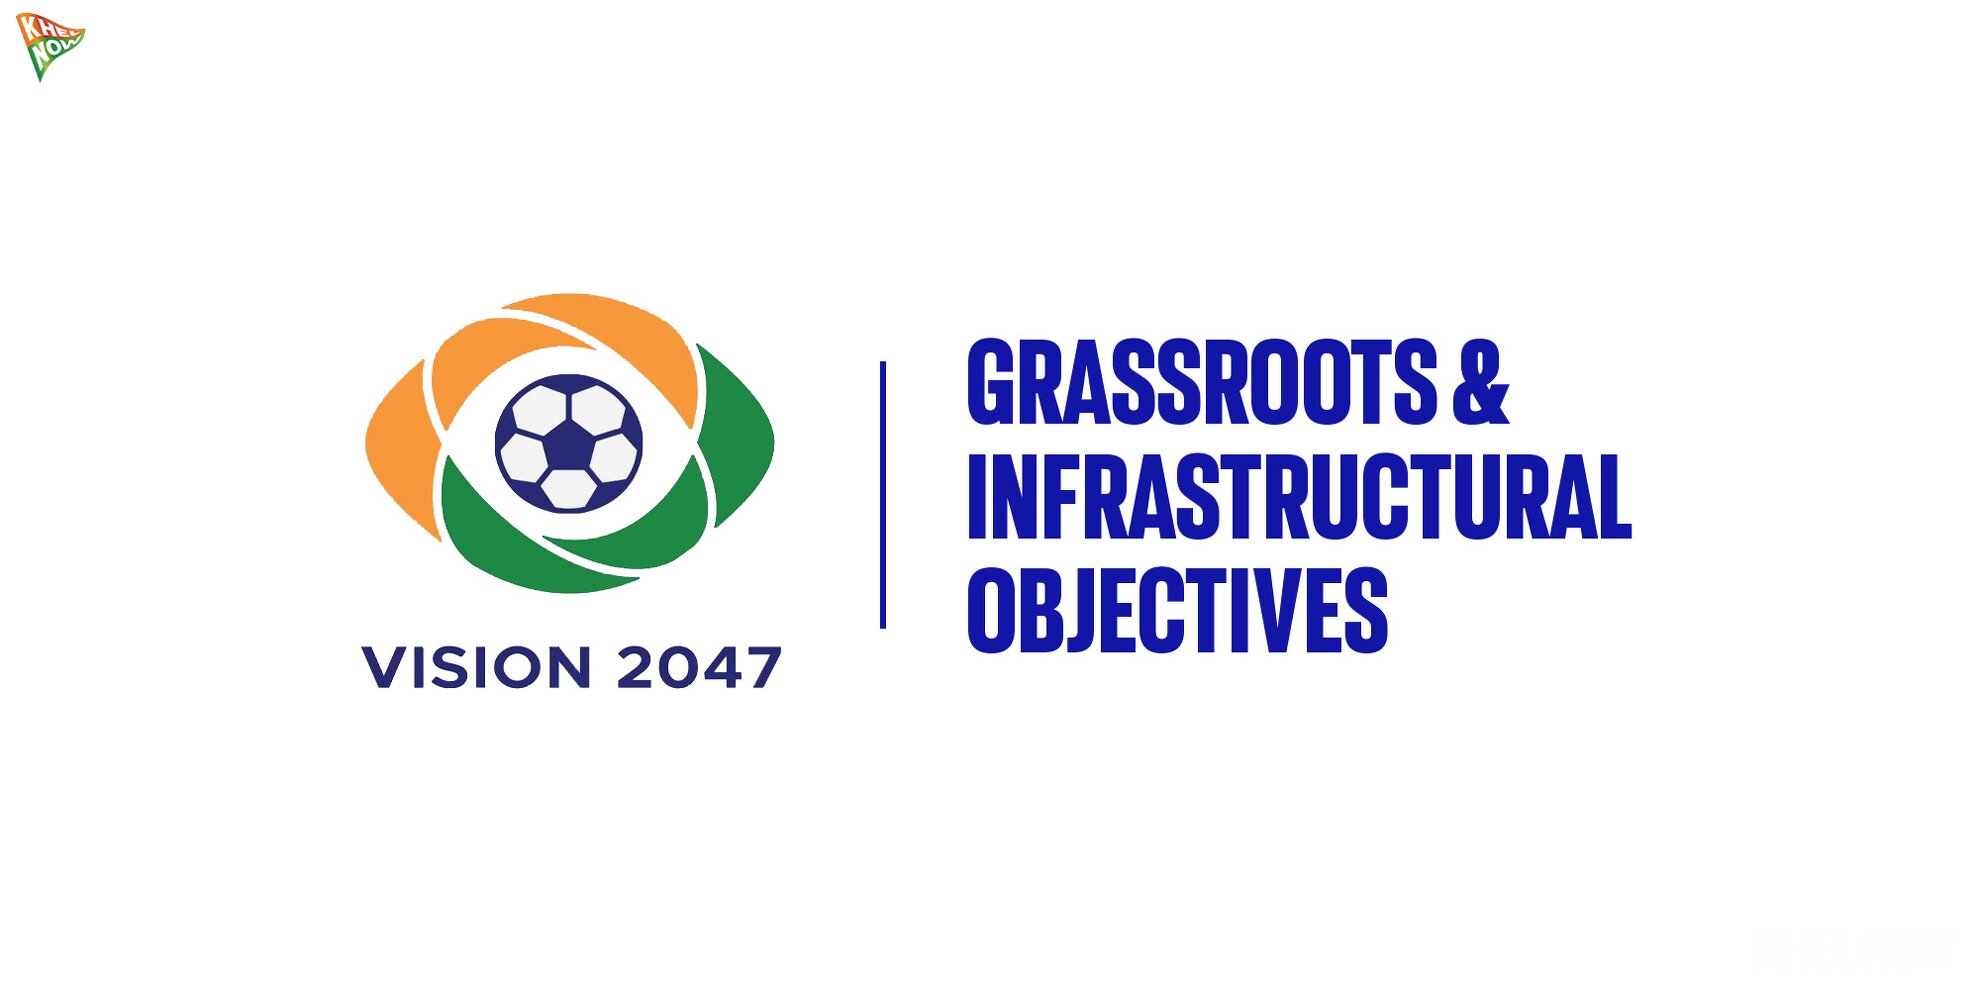 AIFF Strategic Roadmap Vision 2047 Grassroots and Infrastructure Objectives Goals